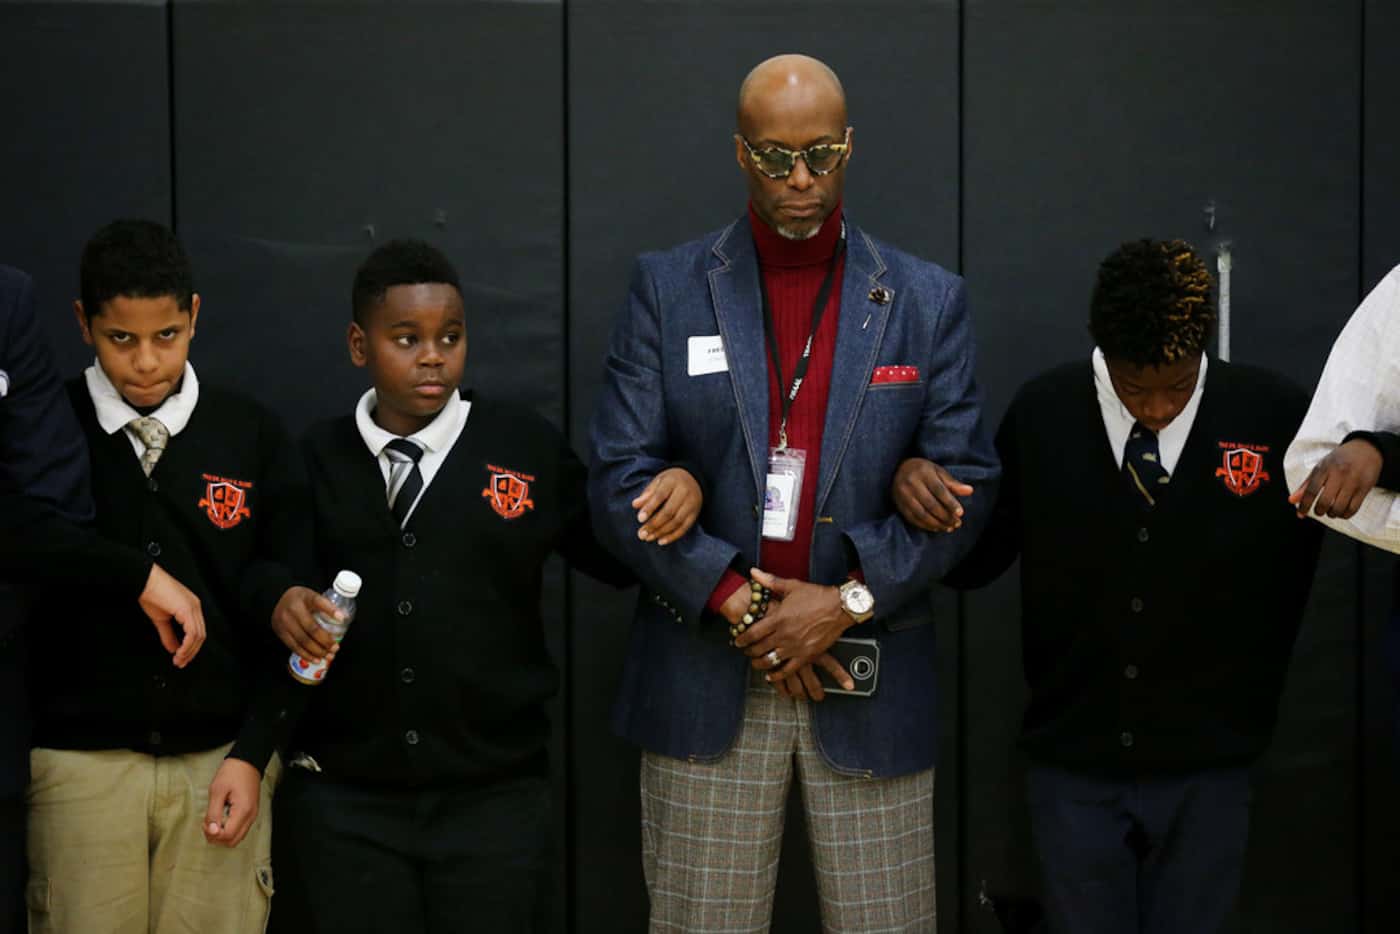 Students and mentors locked arms during a prayer at the end of the "Breakfast with Dads"...